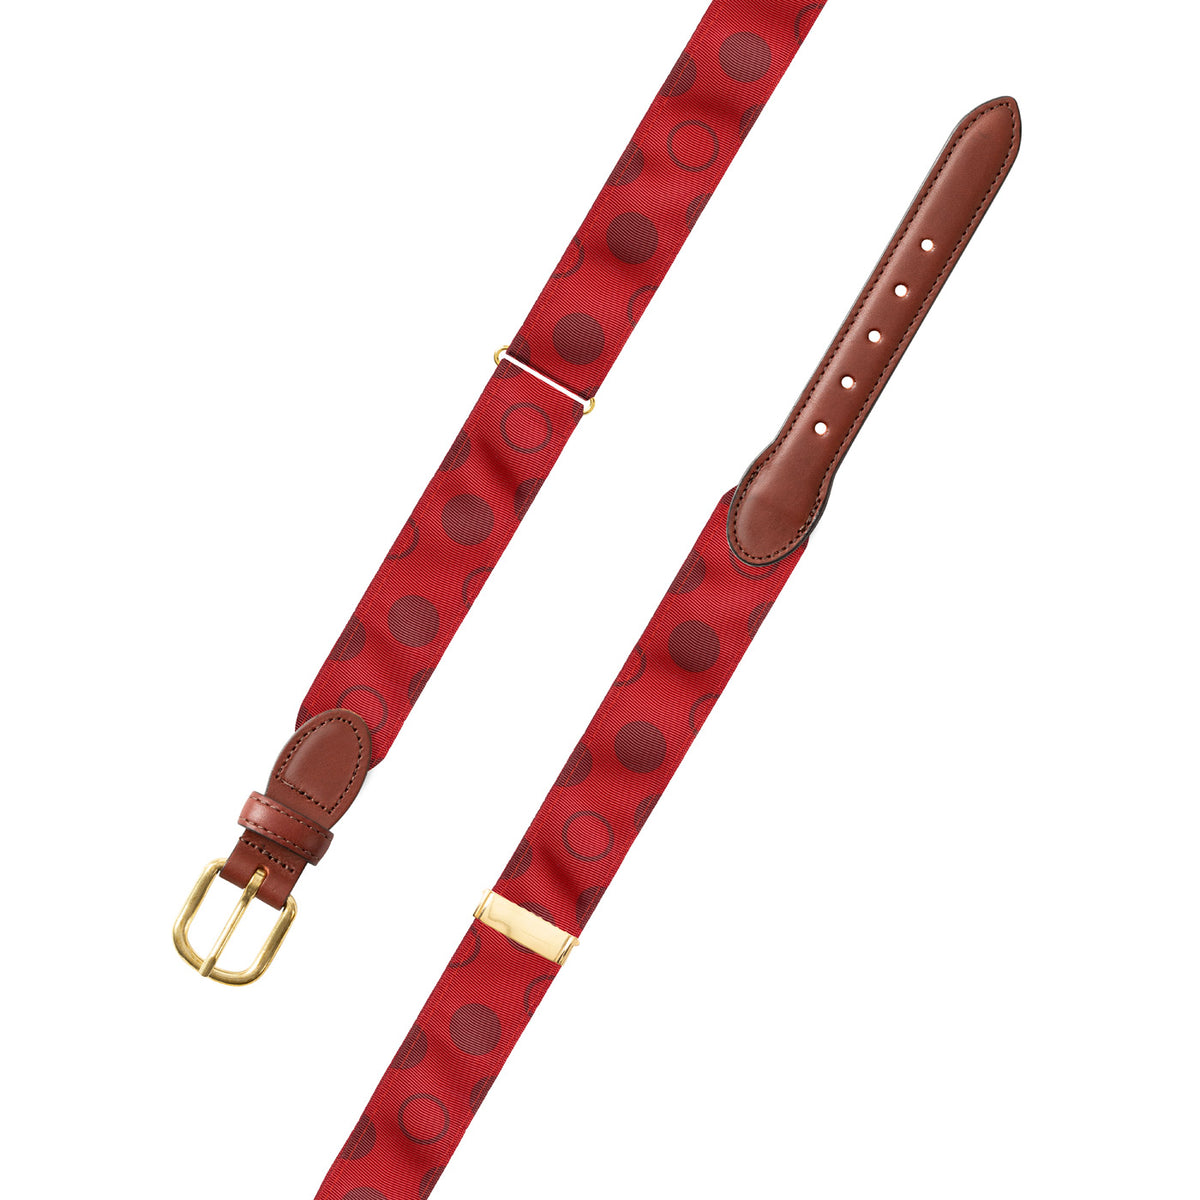 Adjustable Dots on Red Grosgrain Belt with Brown Leather Tabs